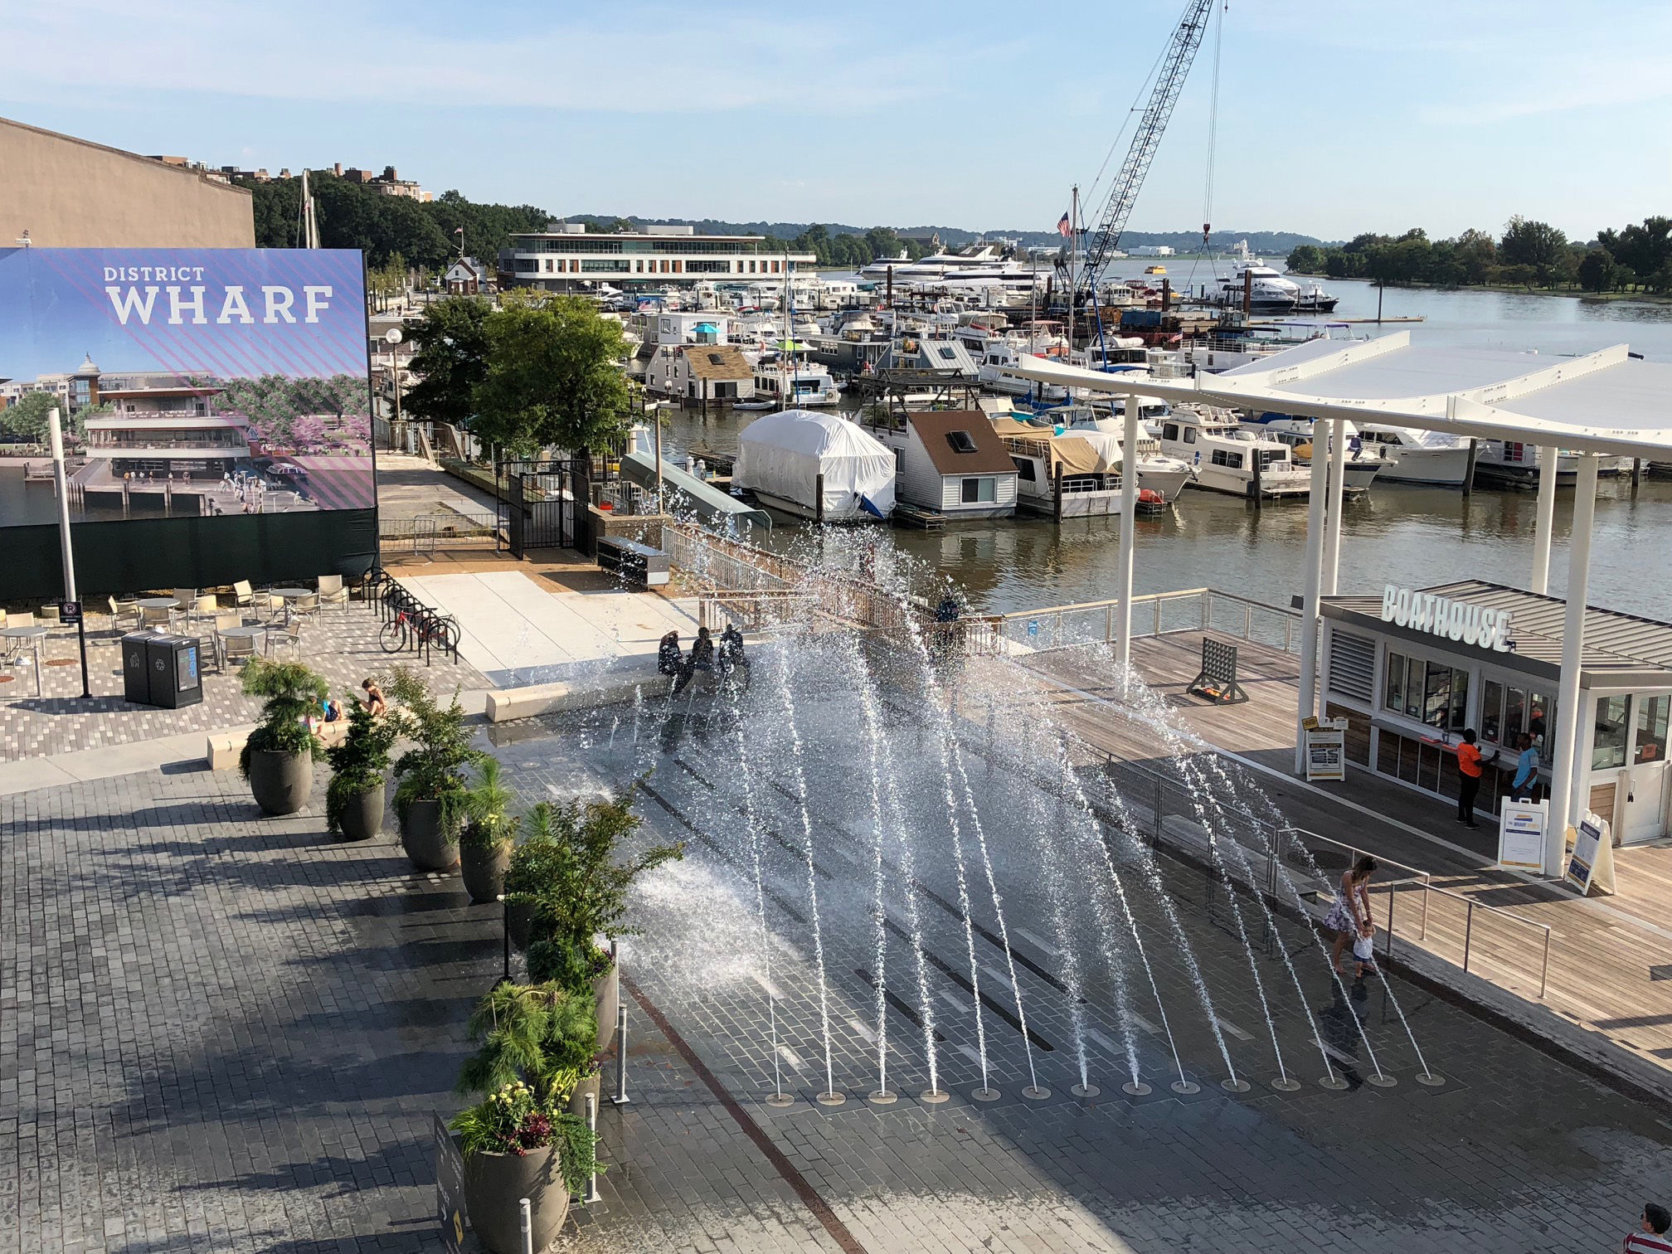 When the garages are full, the executive director of The Wharf Community Association suggests drivers "think about parking up at L’Enfant Plaza and walking down the brand-new Banneker Overlook stairs. It's really easy and the view of the Wharf from the Banneker overlook is amazing." (WTOP/Dave Dildine)